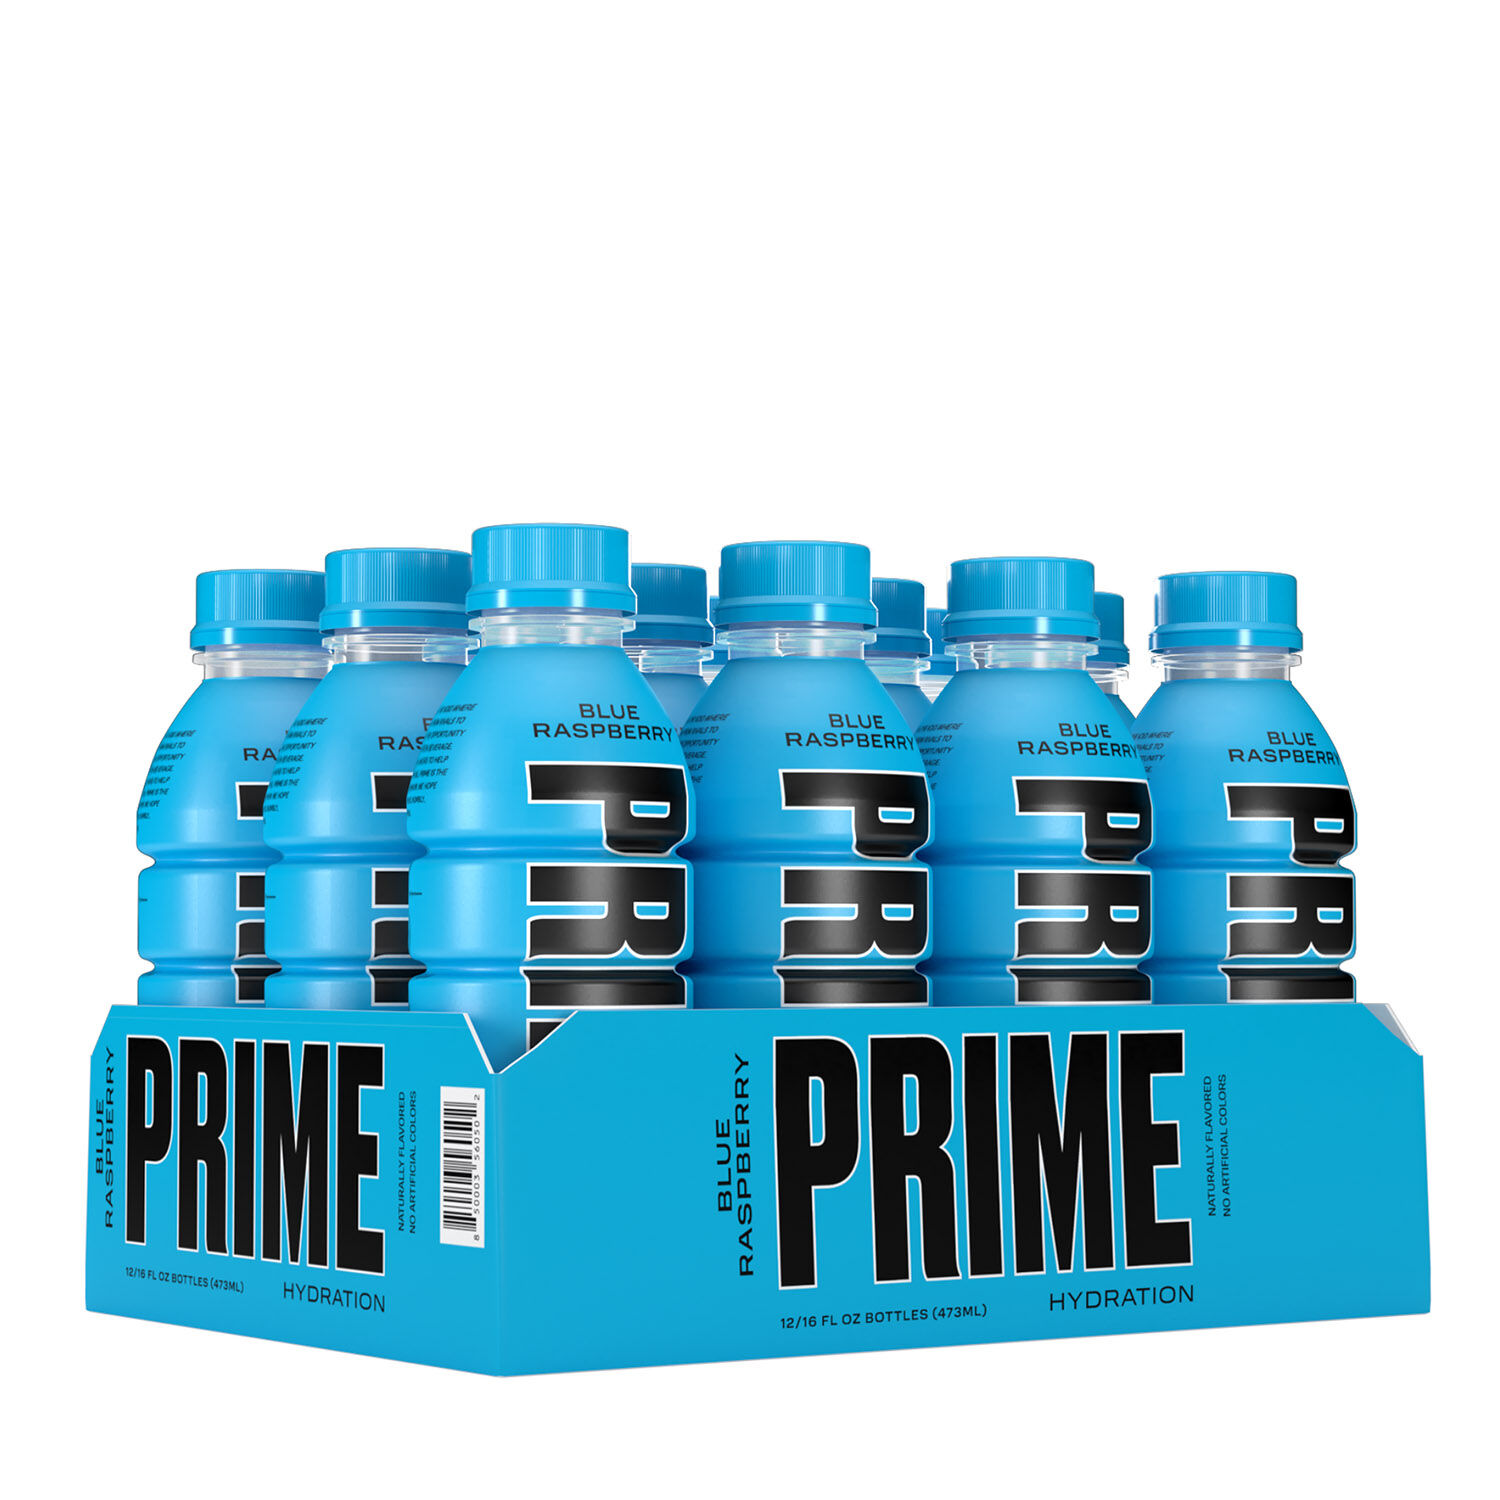 Cherry Freeze Prime Hydration Drink coming to Walmart next week